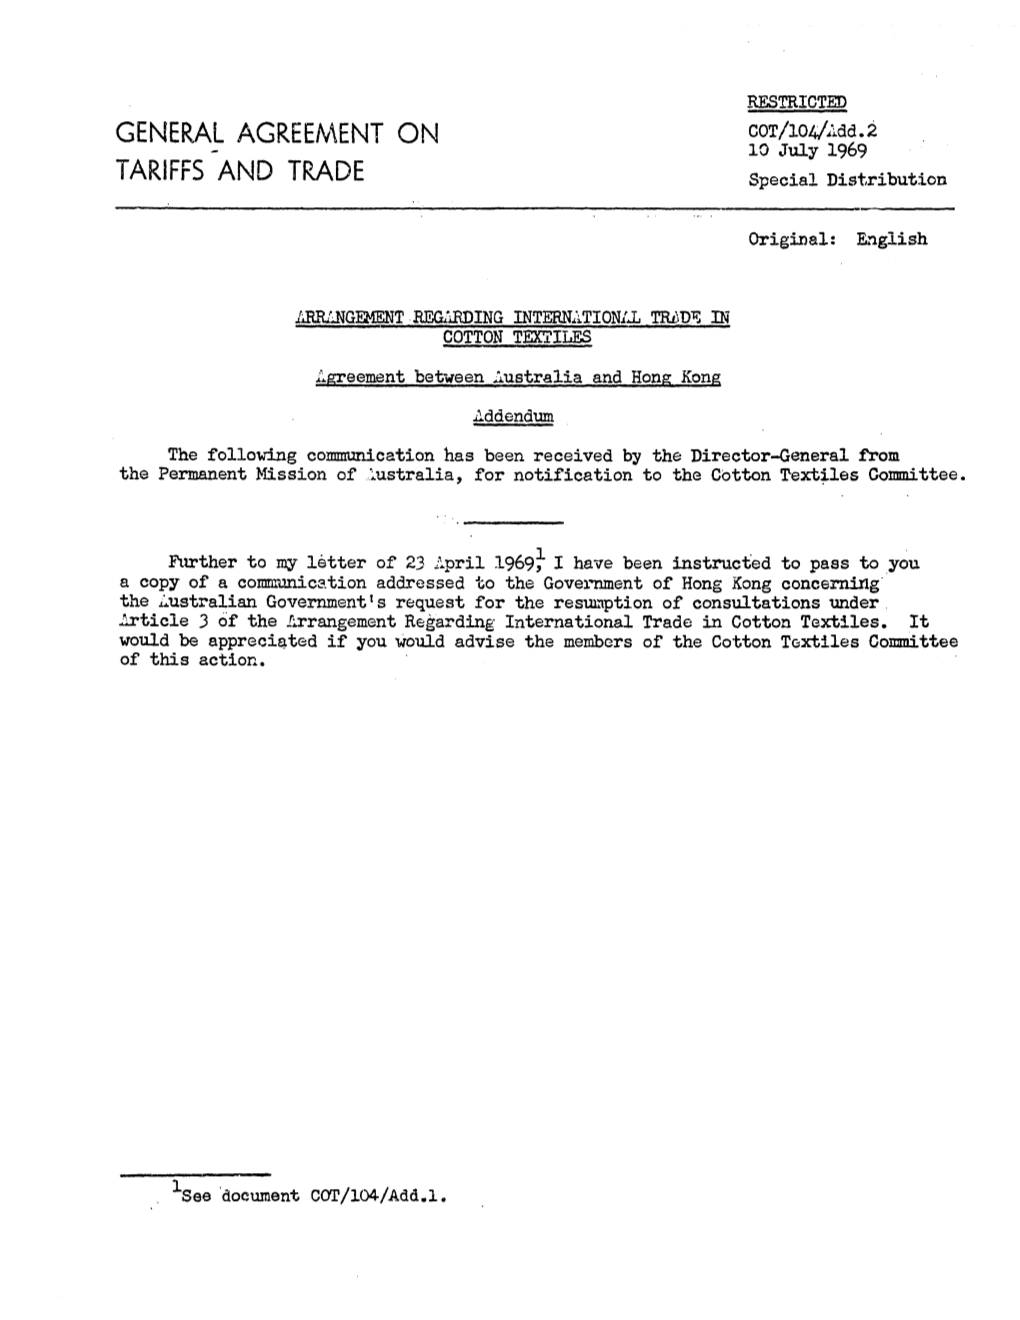 GENERAL AGREEMENT on COT/104/Add.2 10 July 1969 TARIFFS and TRADE Special Distribution